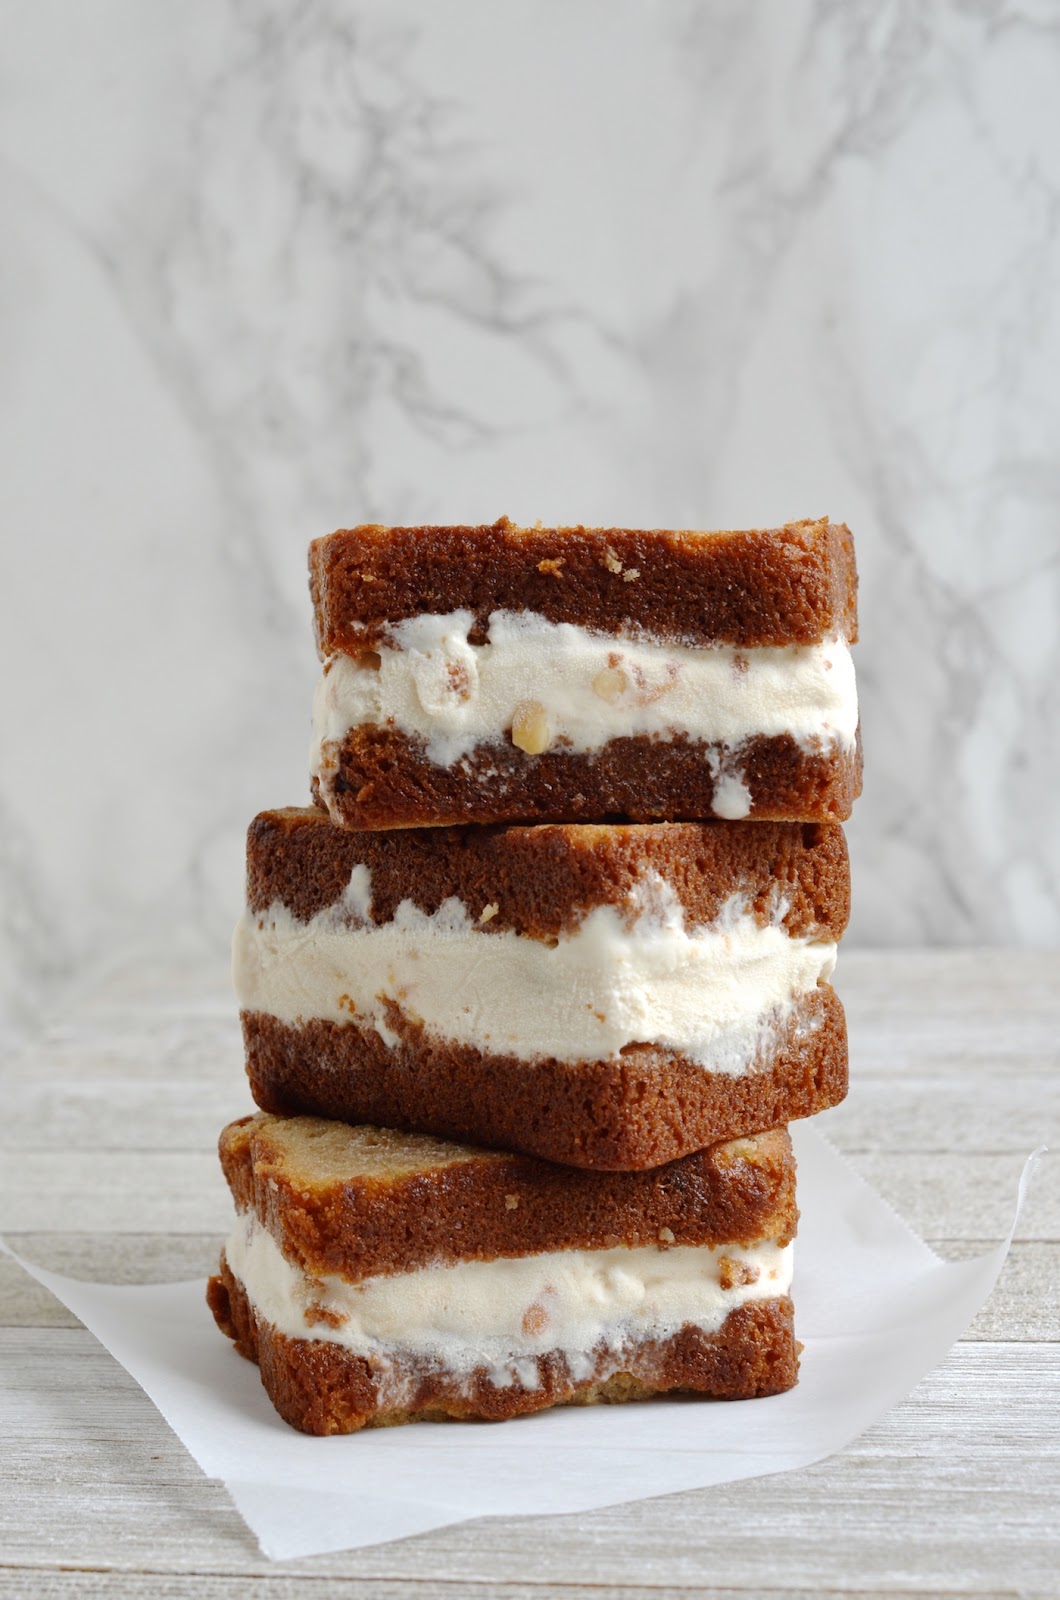 6 Amazing Ice Cream Sandwich Ideas You Have To Try Always Order Dessert